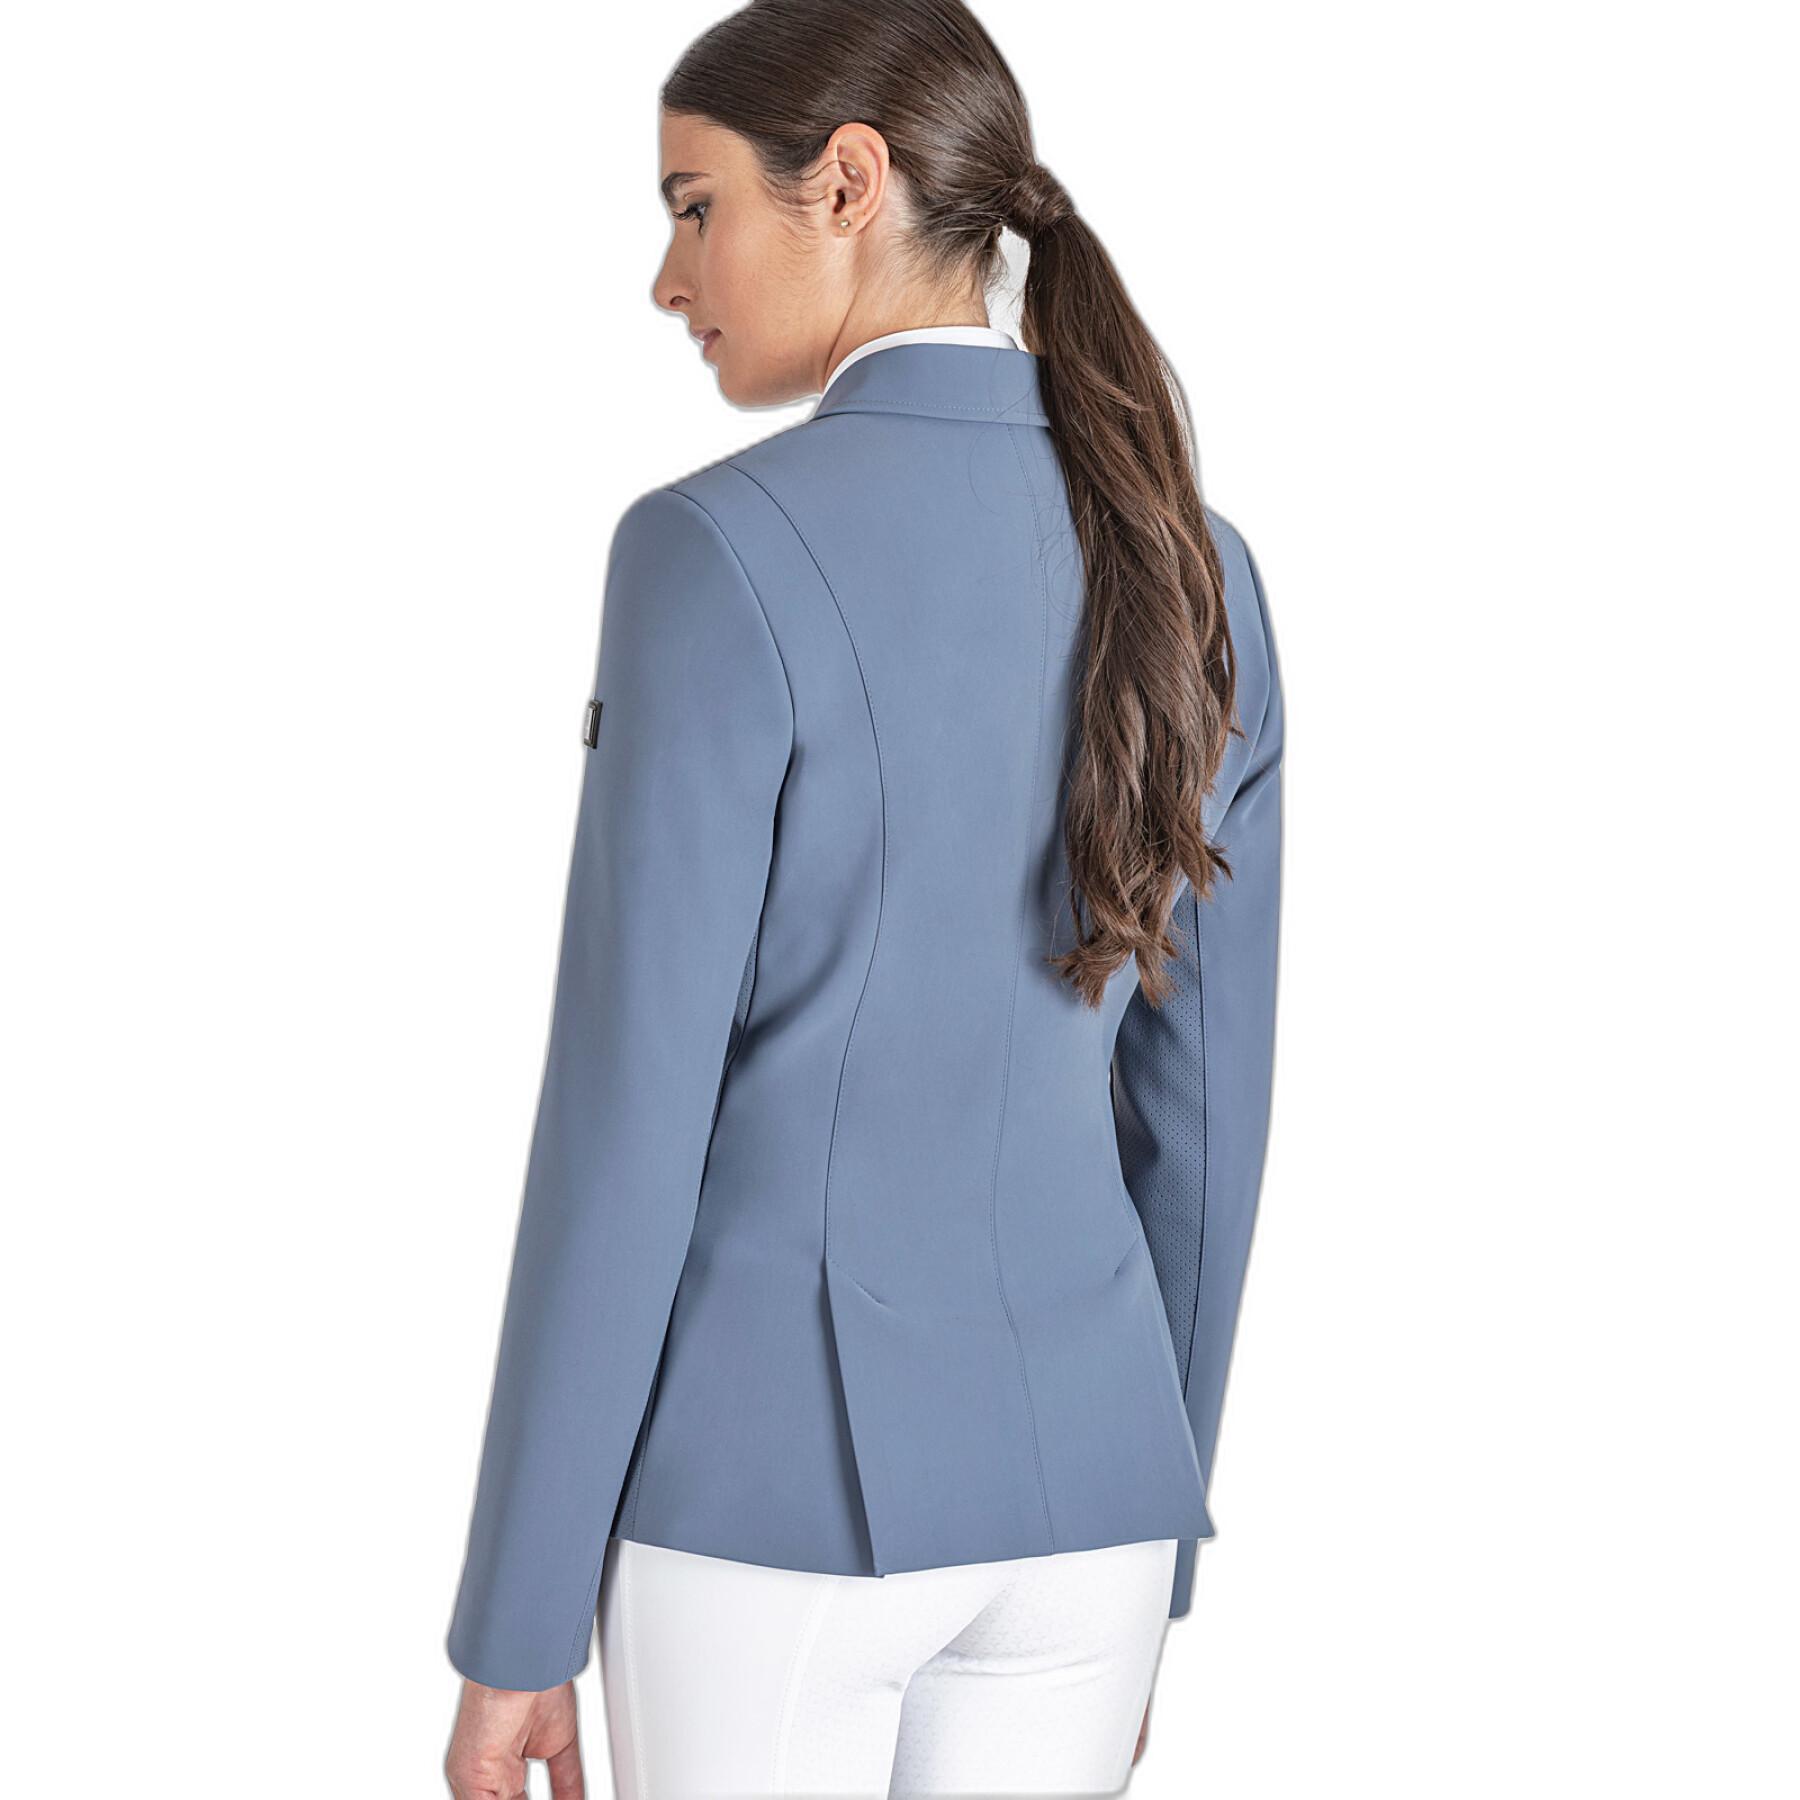 Women's competition jacket Equiline Tempest